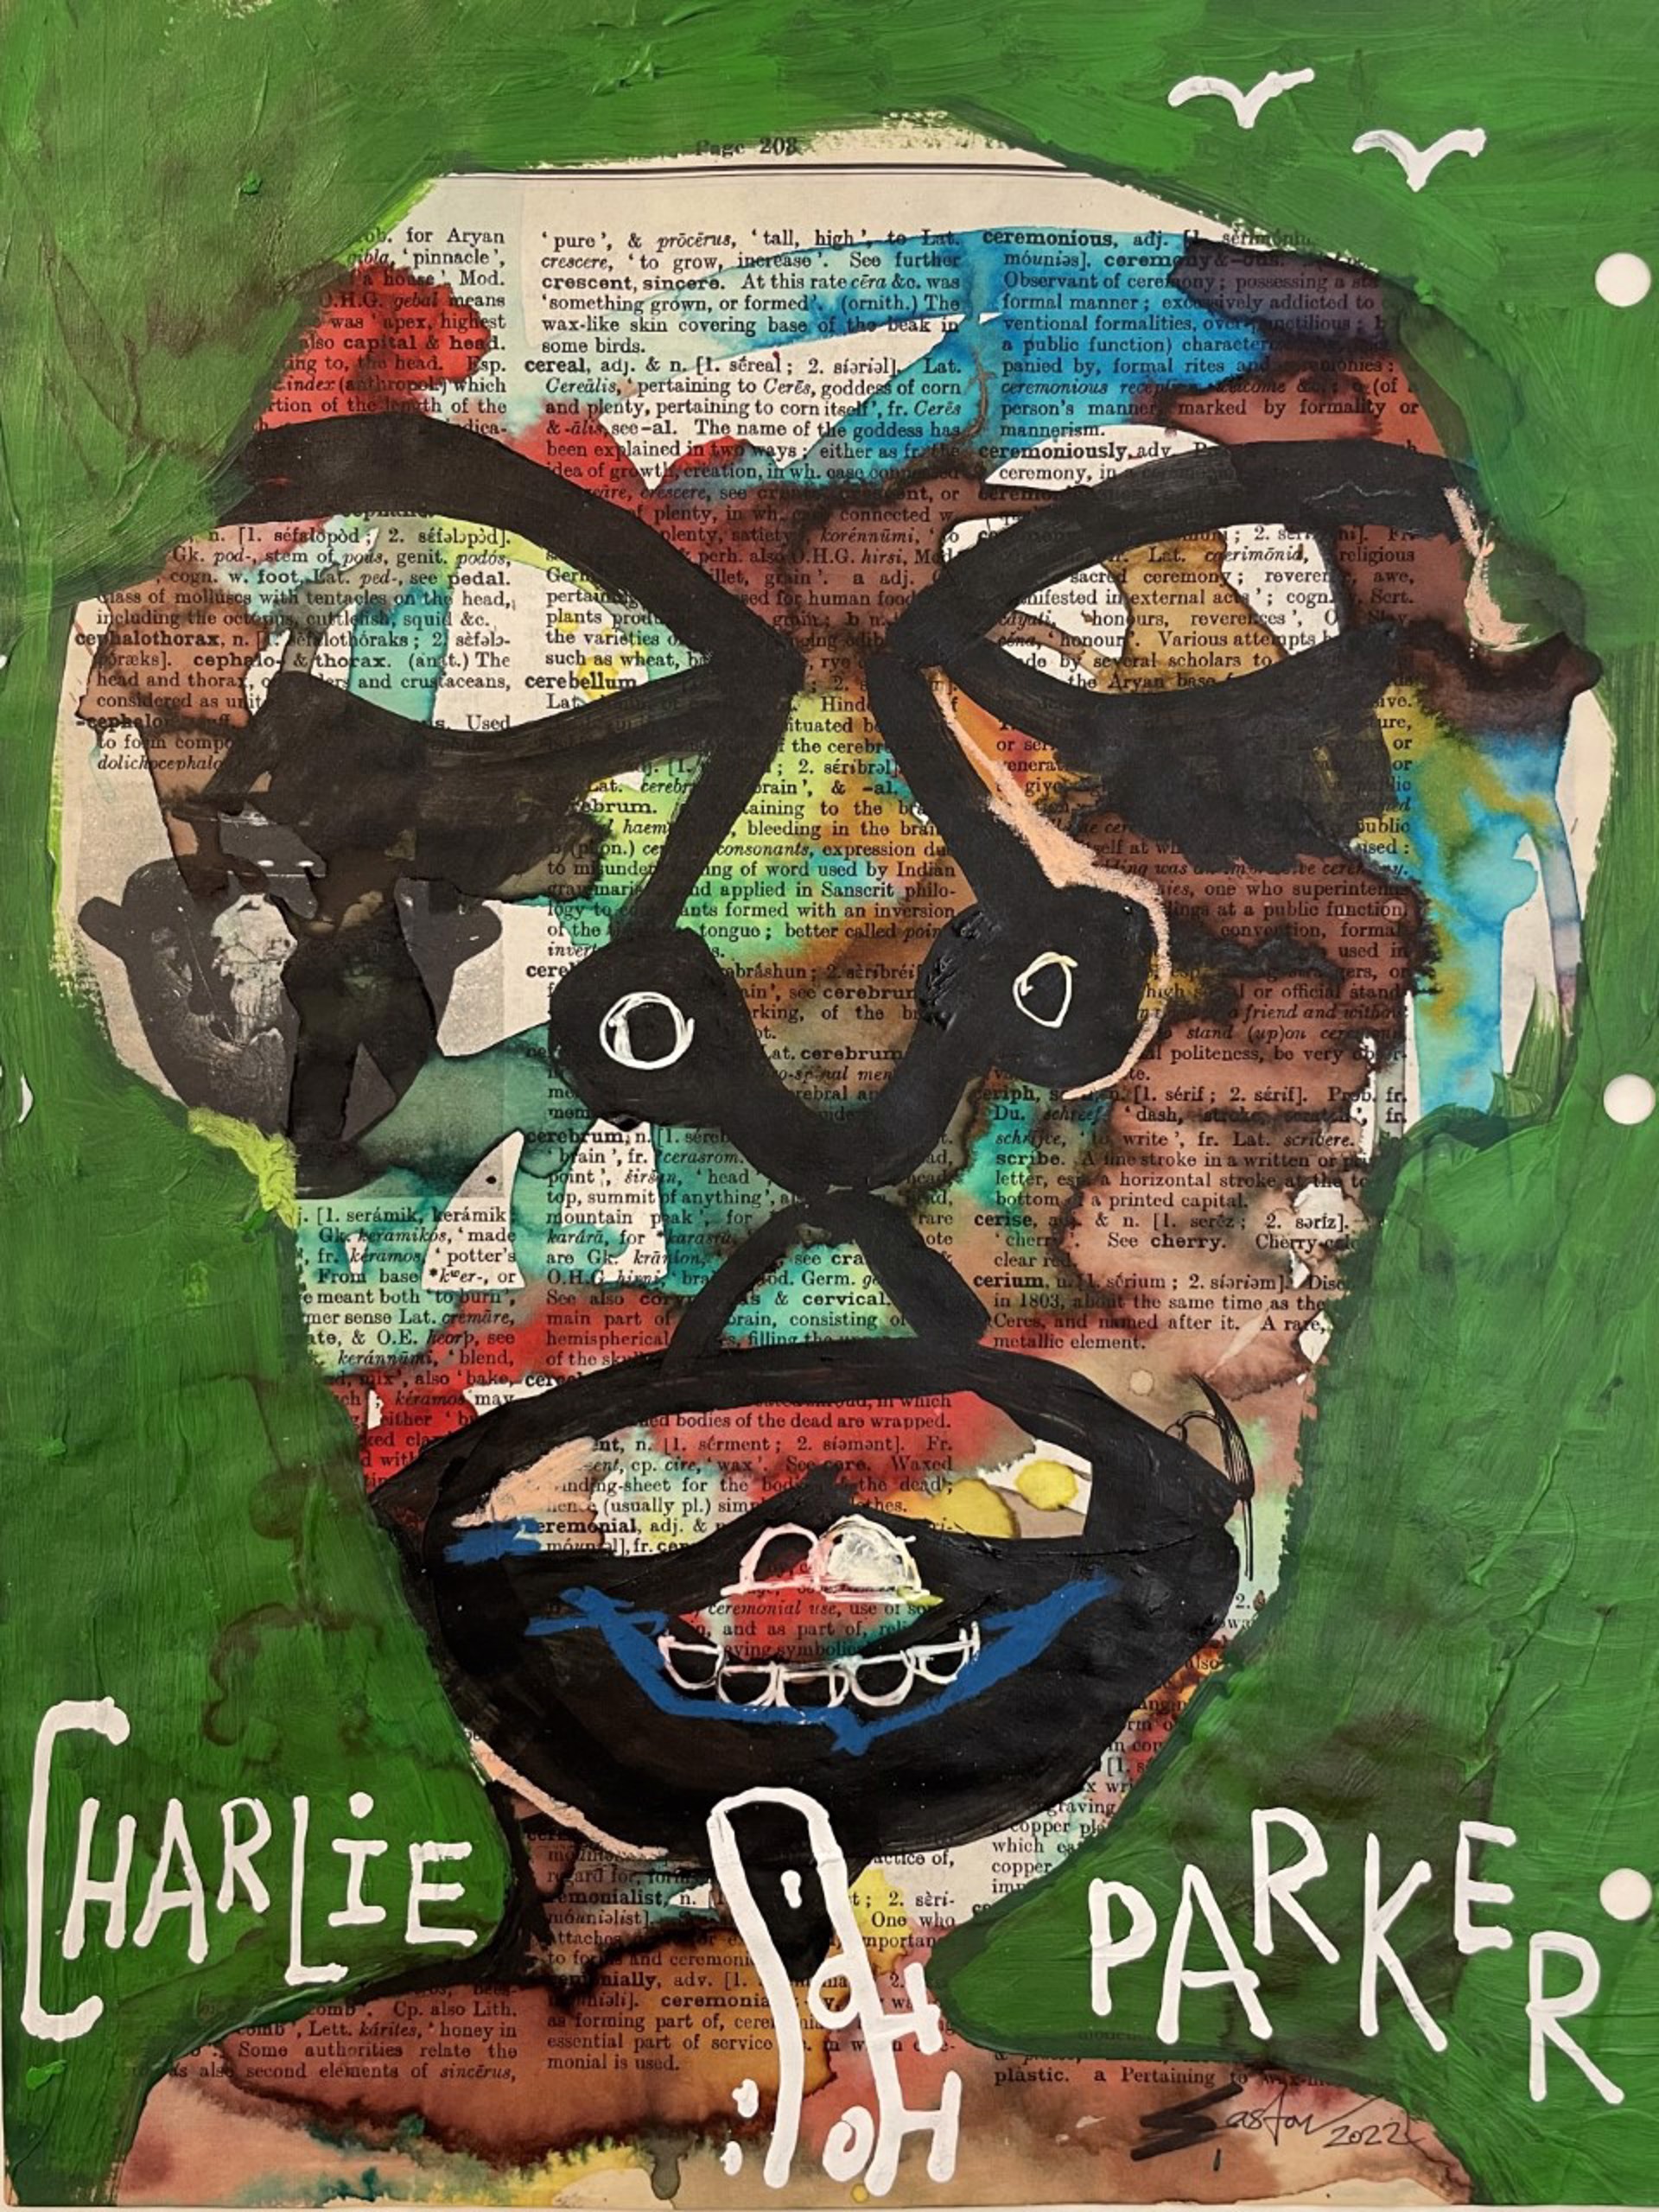 "Charlie Parker" by Easton Davy